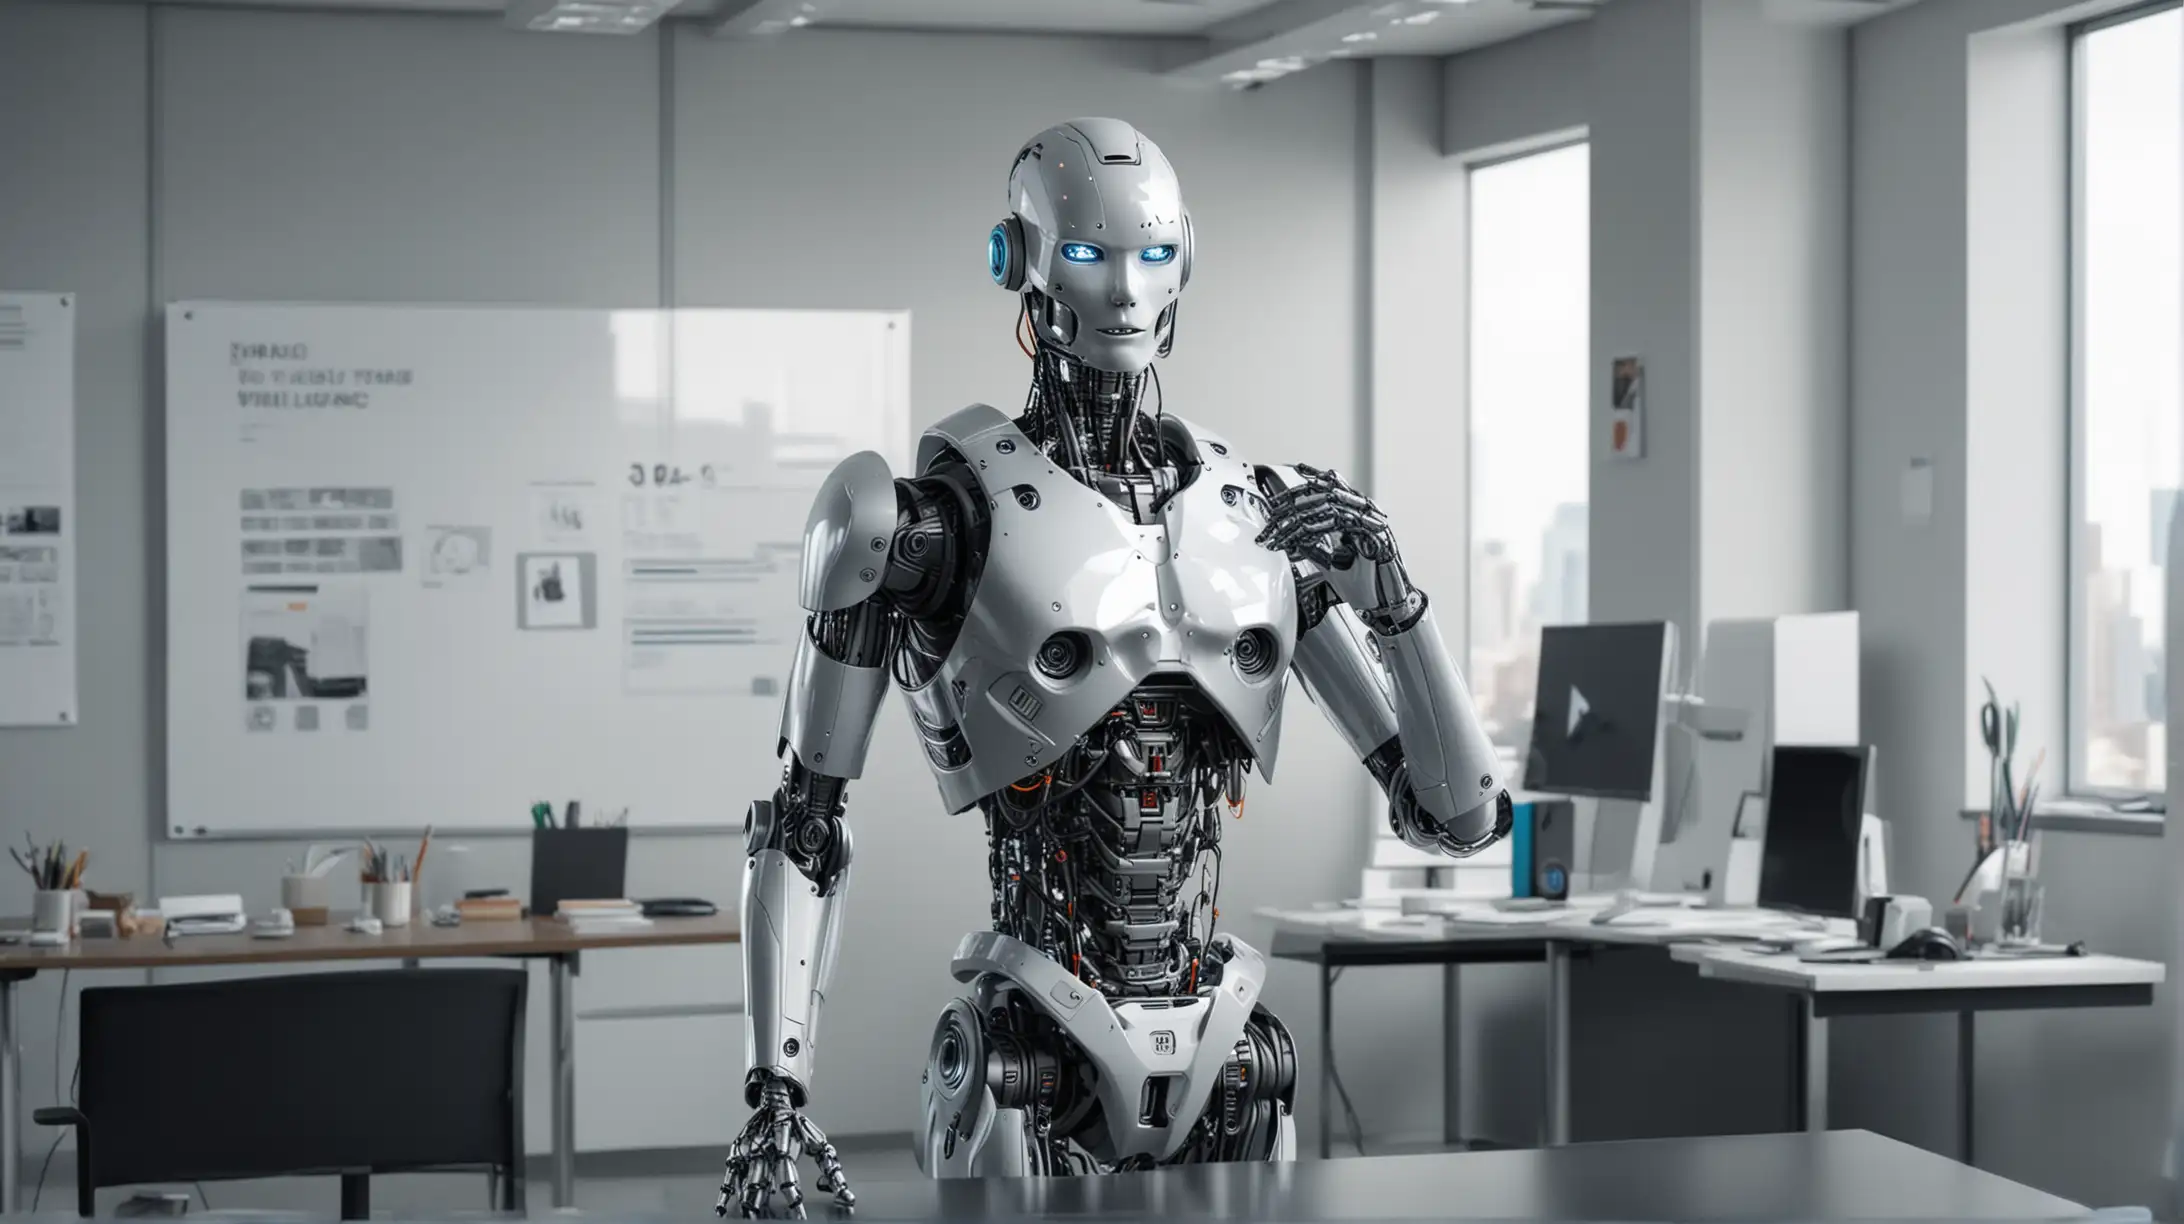 super realistic, 3024 year, a robot, standing in an office anxiously making a phone call, a fully transparent future office, high-tech office tools and virtual screens, futuristic design style